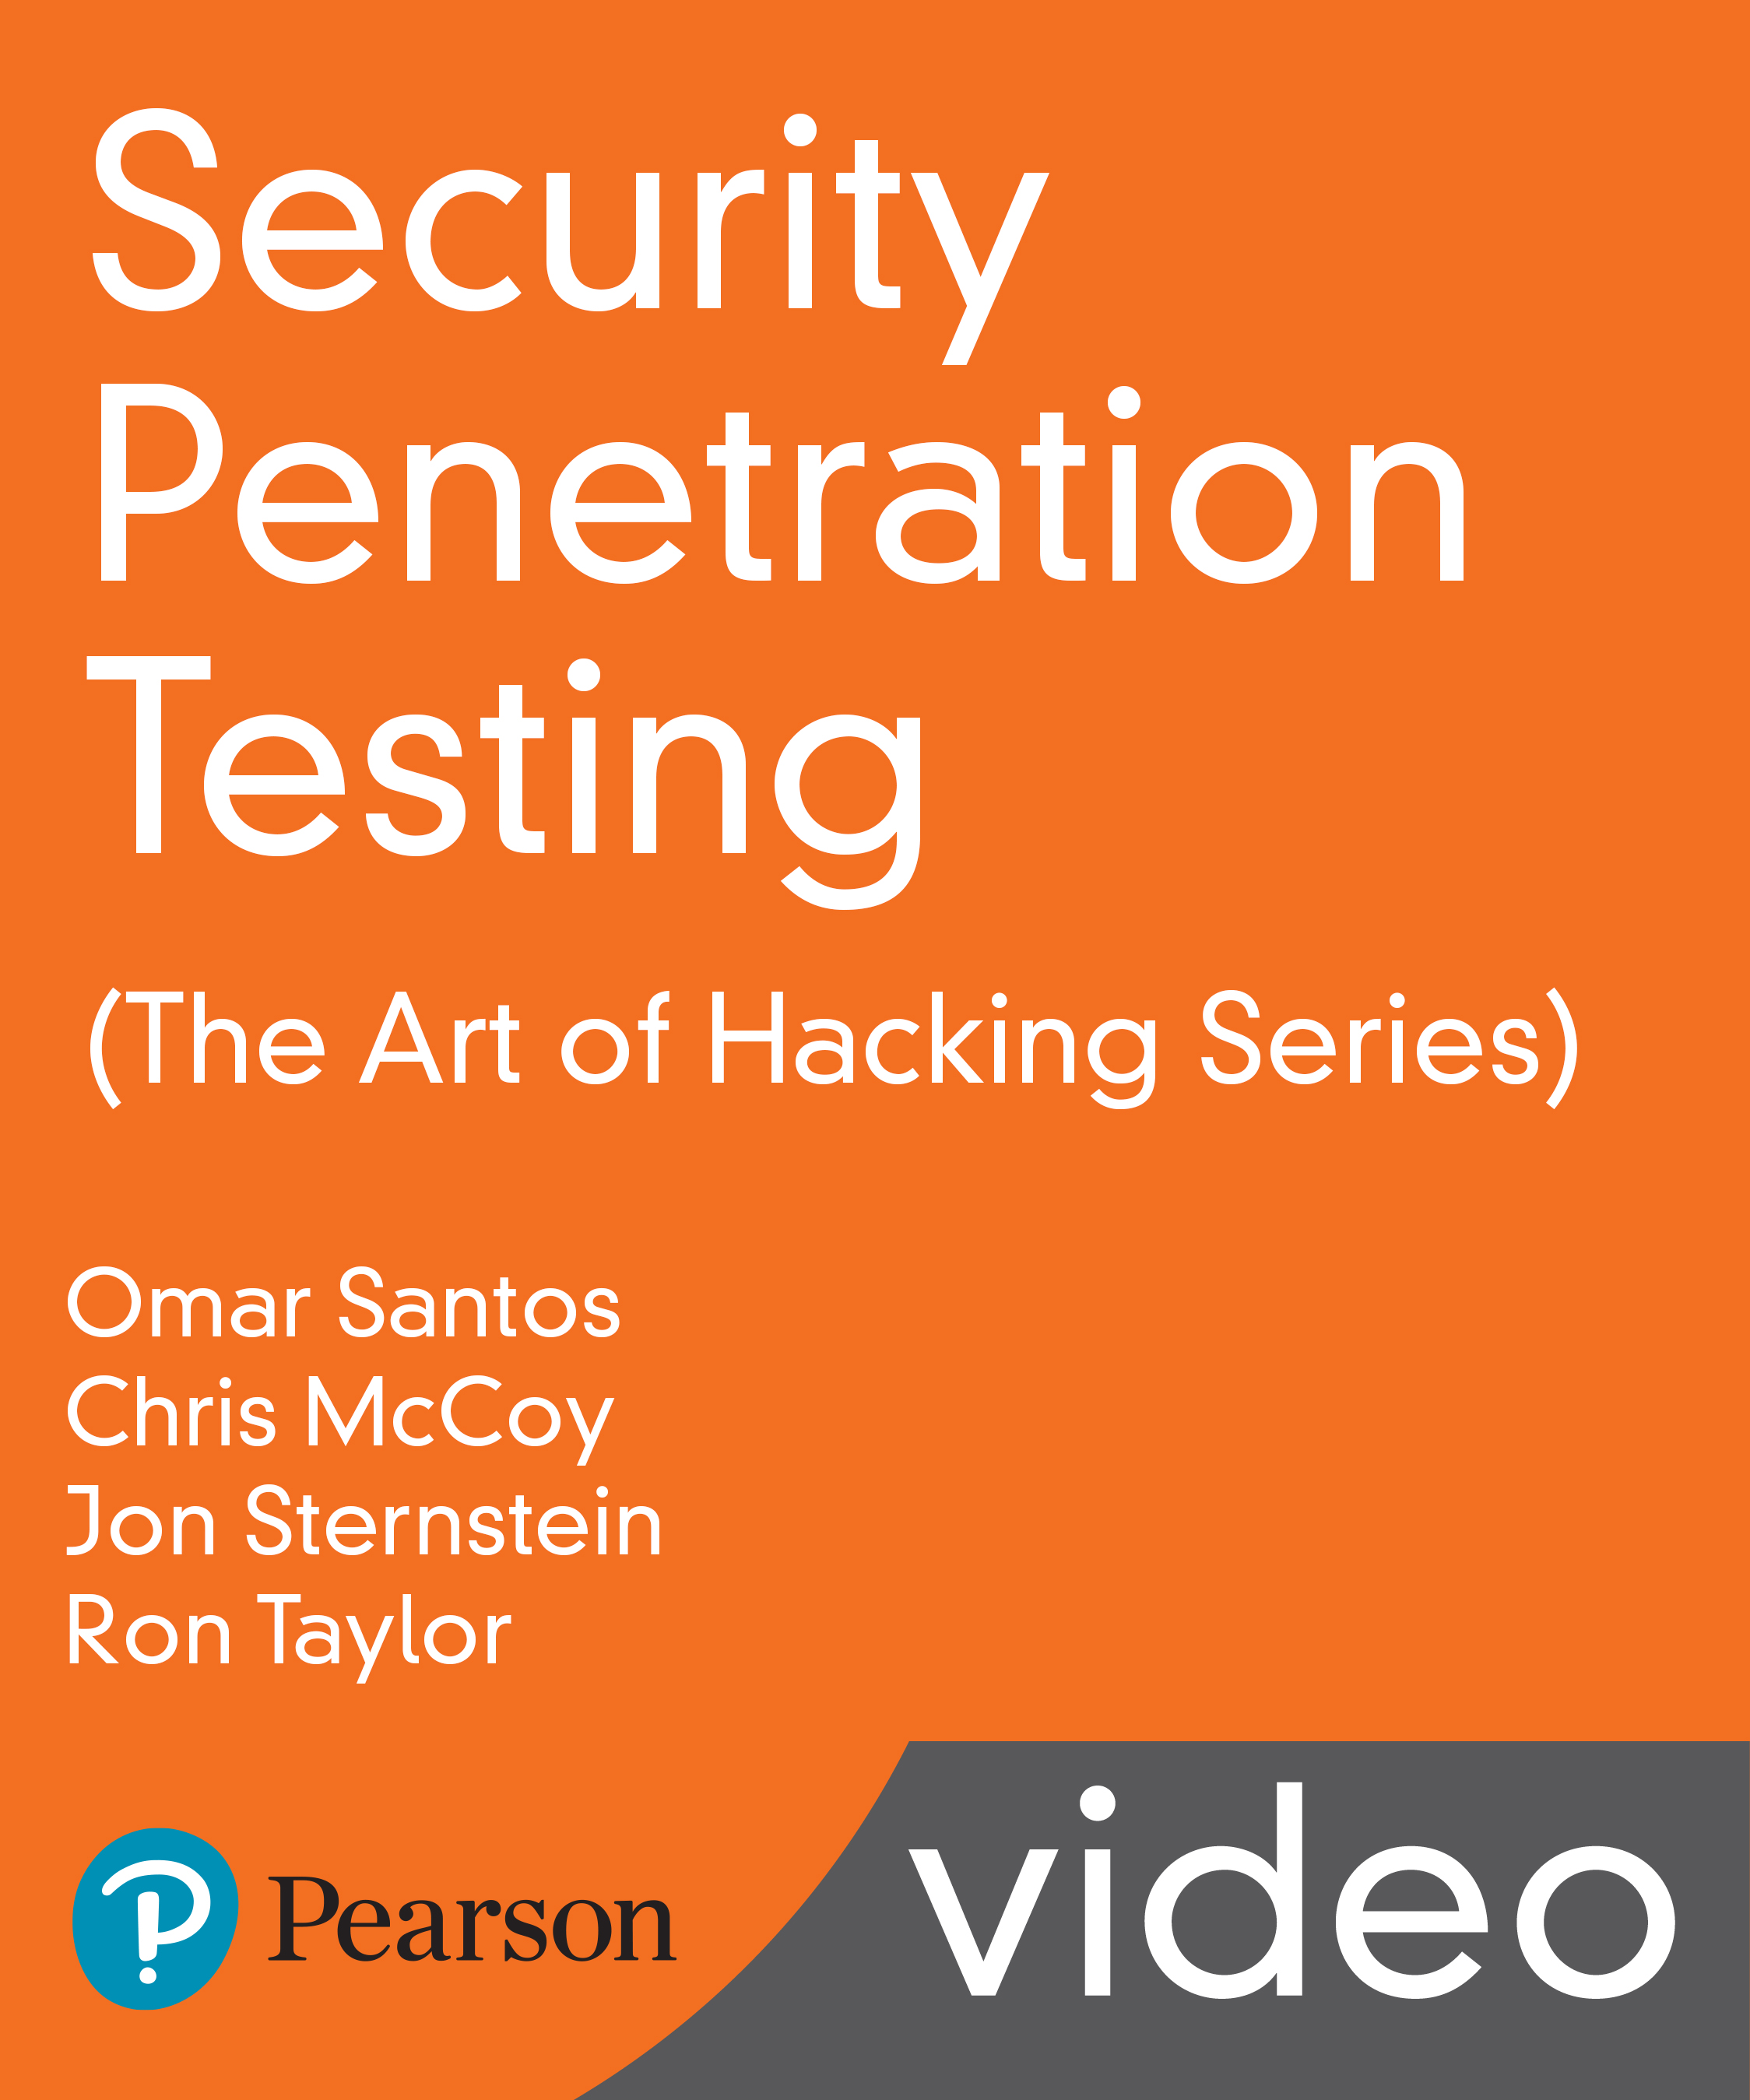 Security Penetration Testing (The Art of Hacking Series) LiveLessons